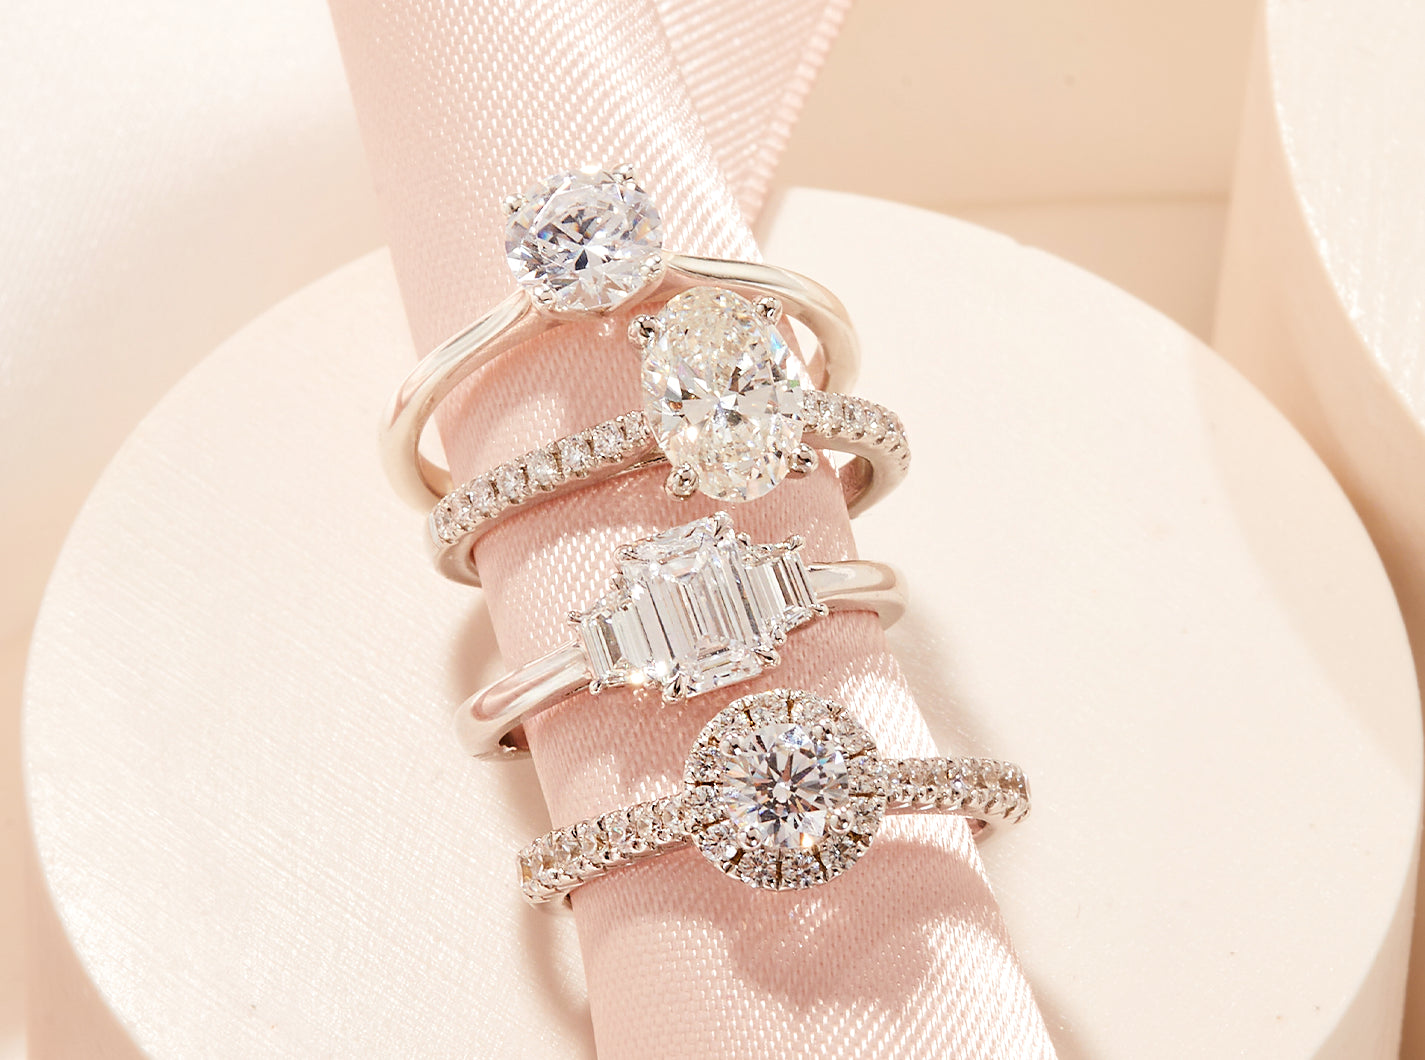 Discover Stunning Diamond Ring Styles for Every Personality